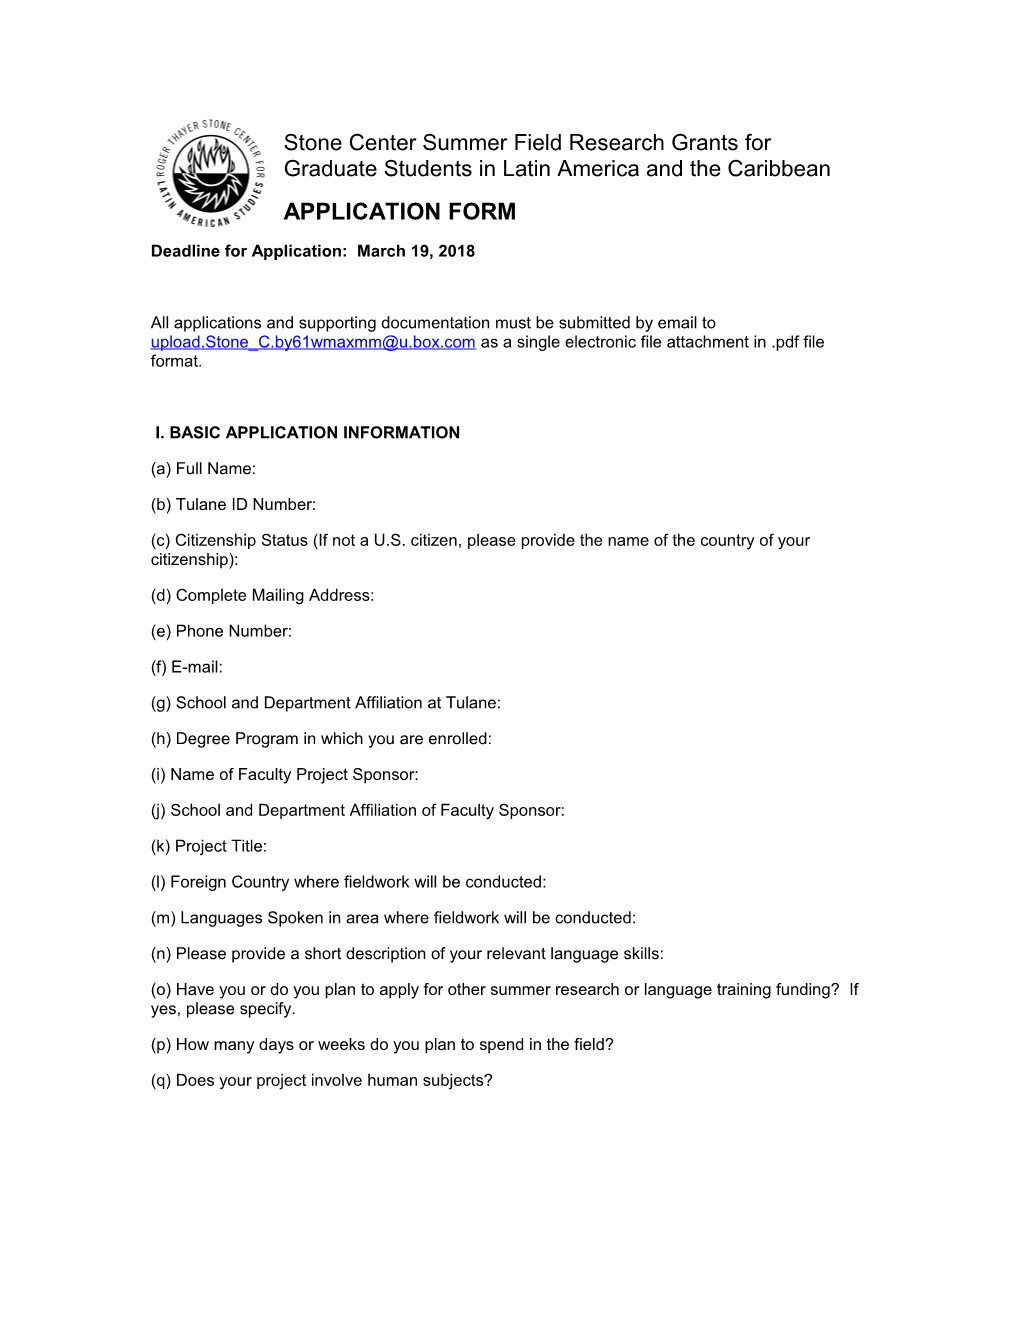 Student Application for Summer Funding - Application Form